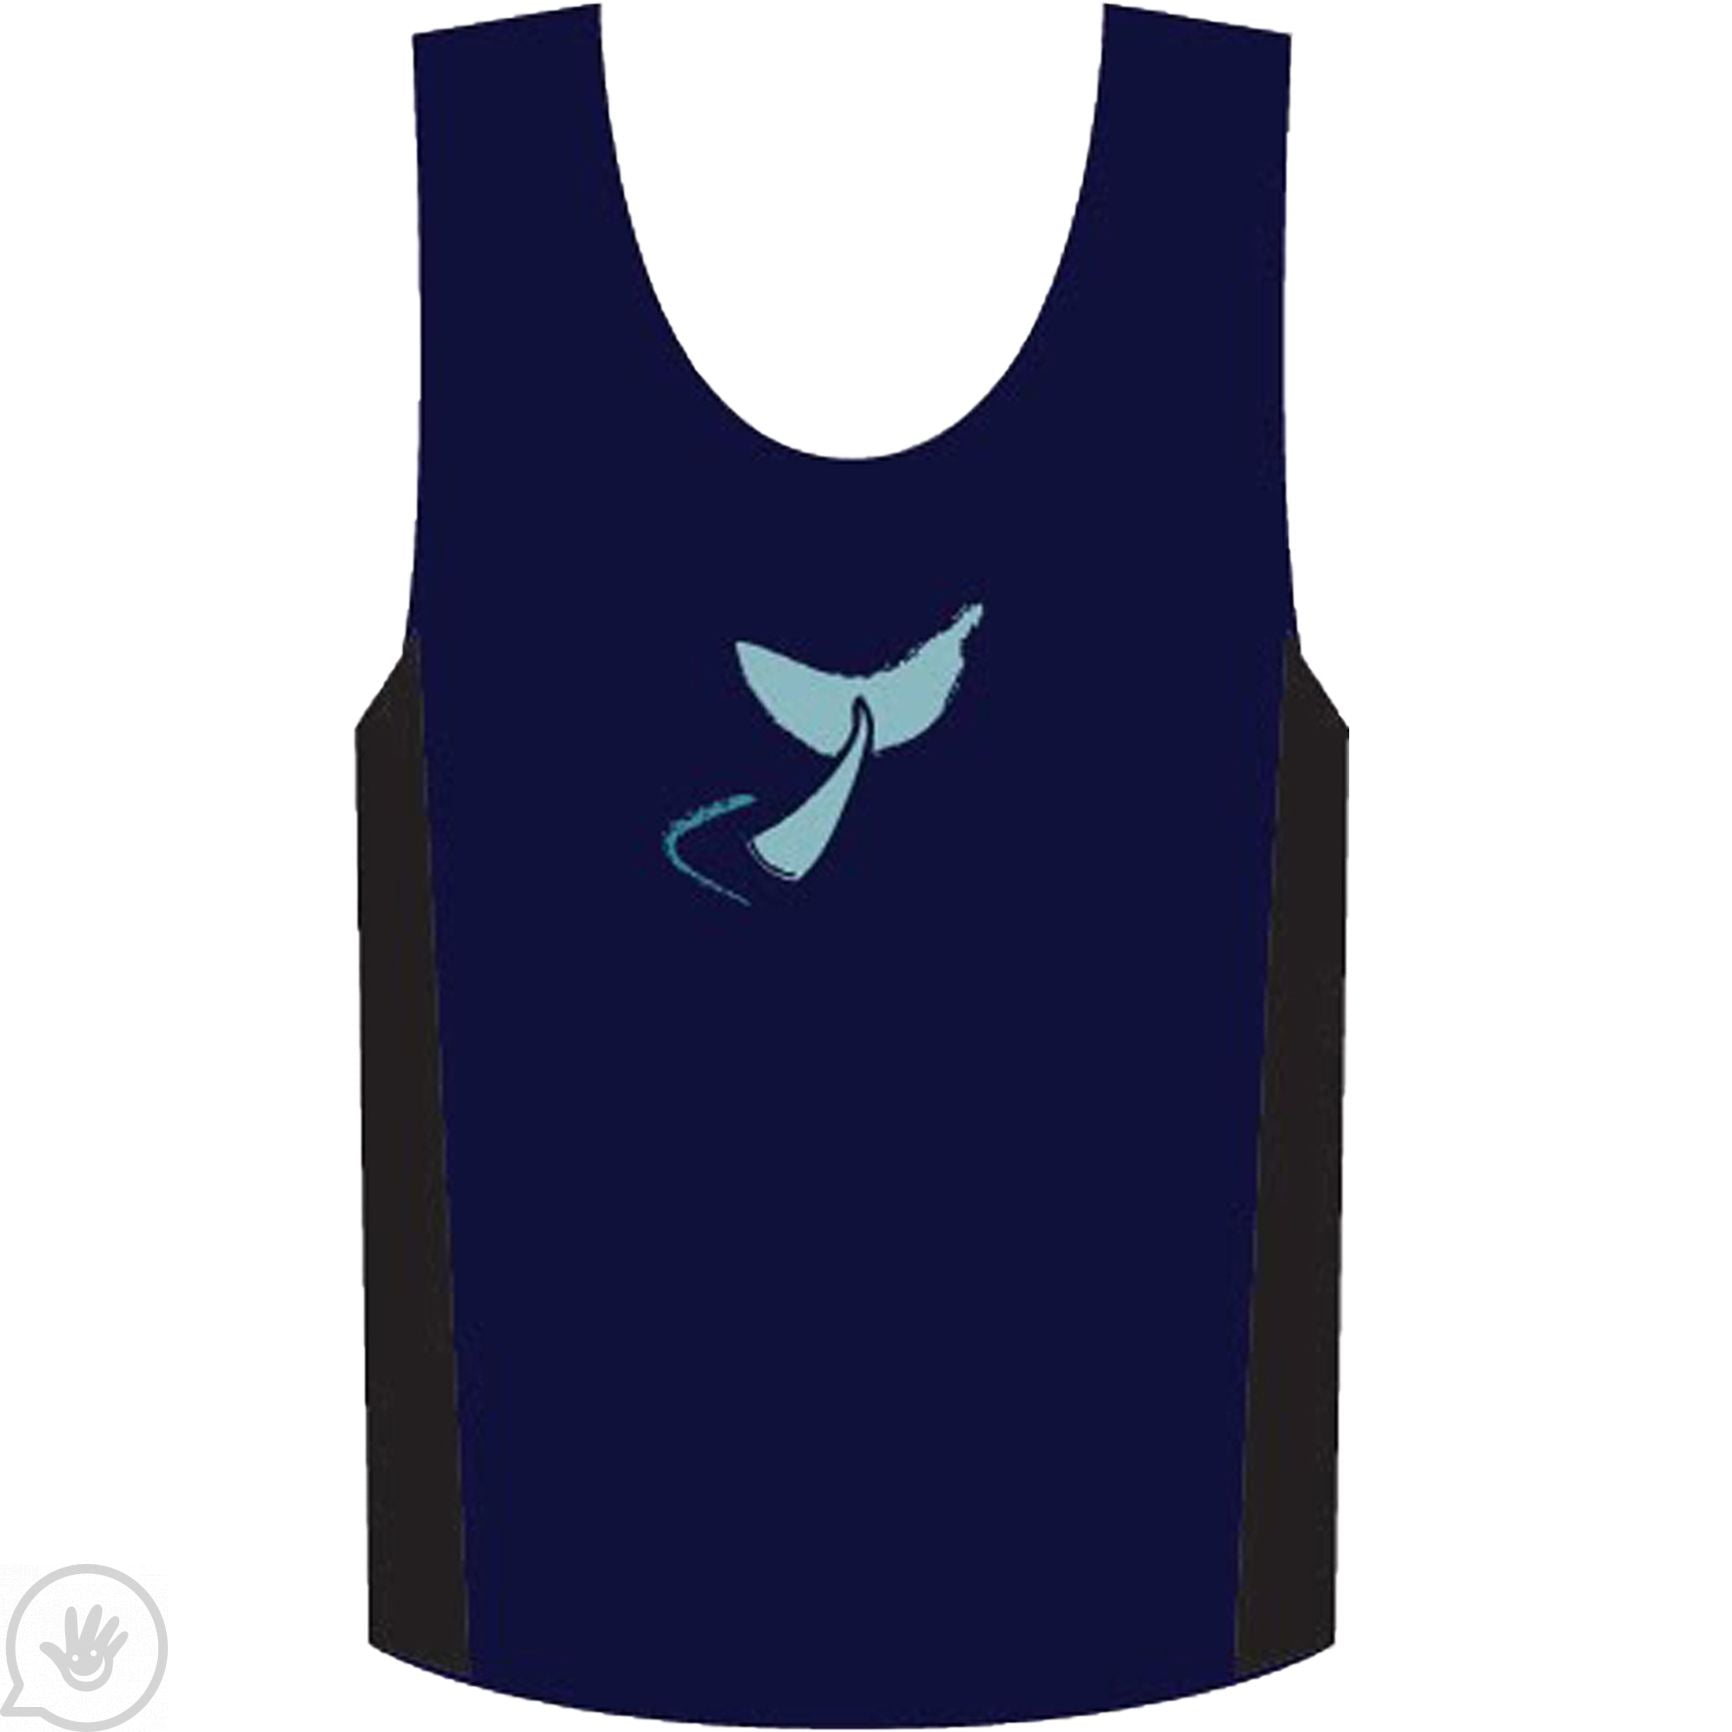 The backside of the Dolphin Vest with Graphics, which has a small tail.